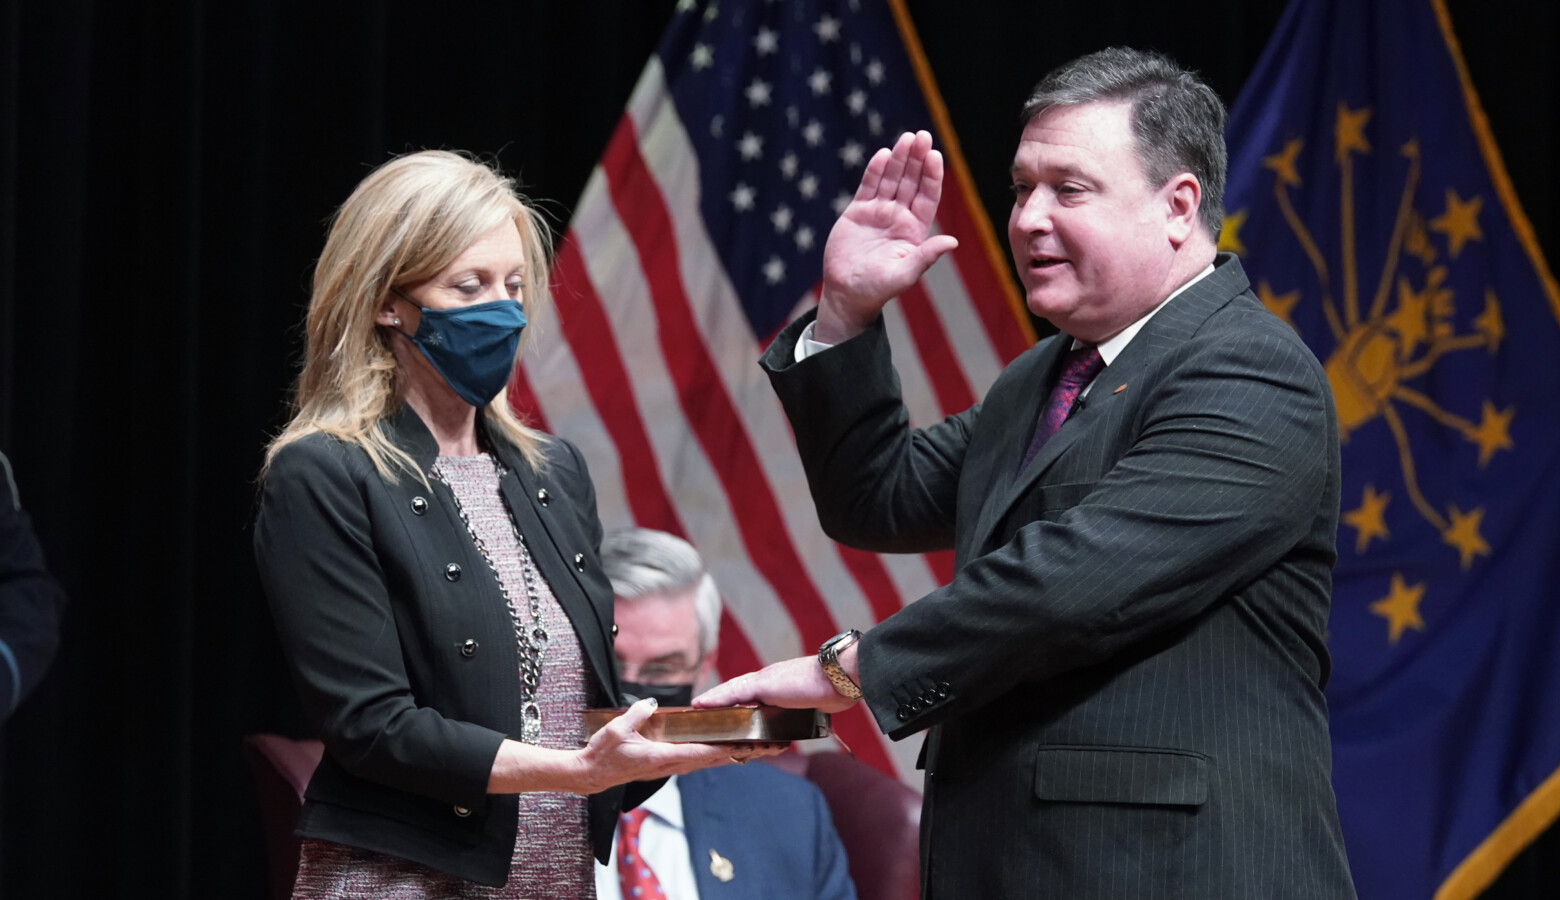 Todd Rokita, alongside his wife Kathy, is sworn in as Indiana's new Attorney General. (Associated Press)